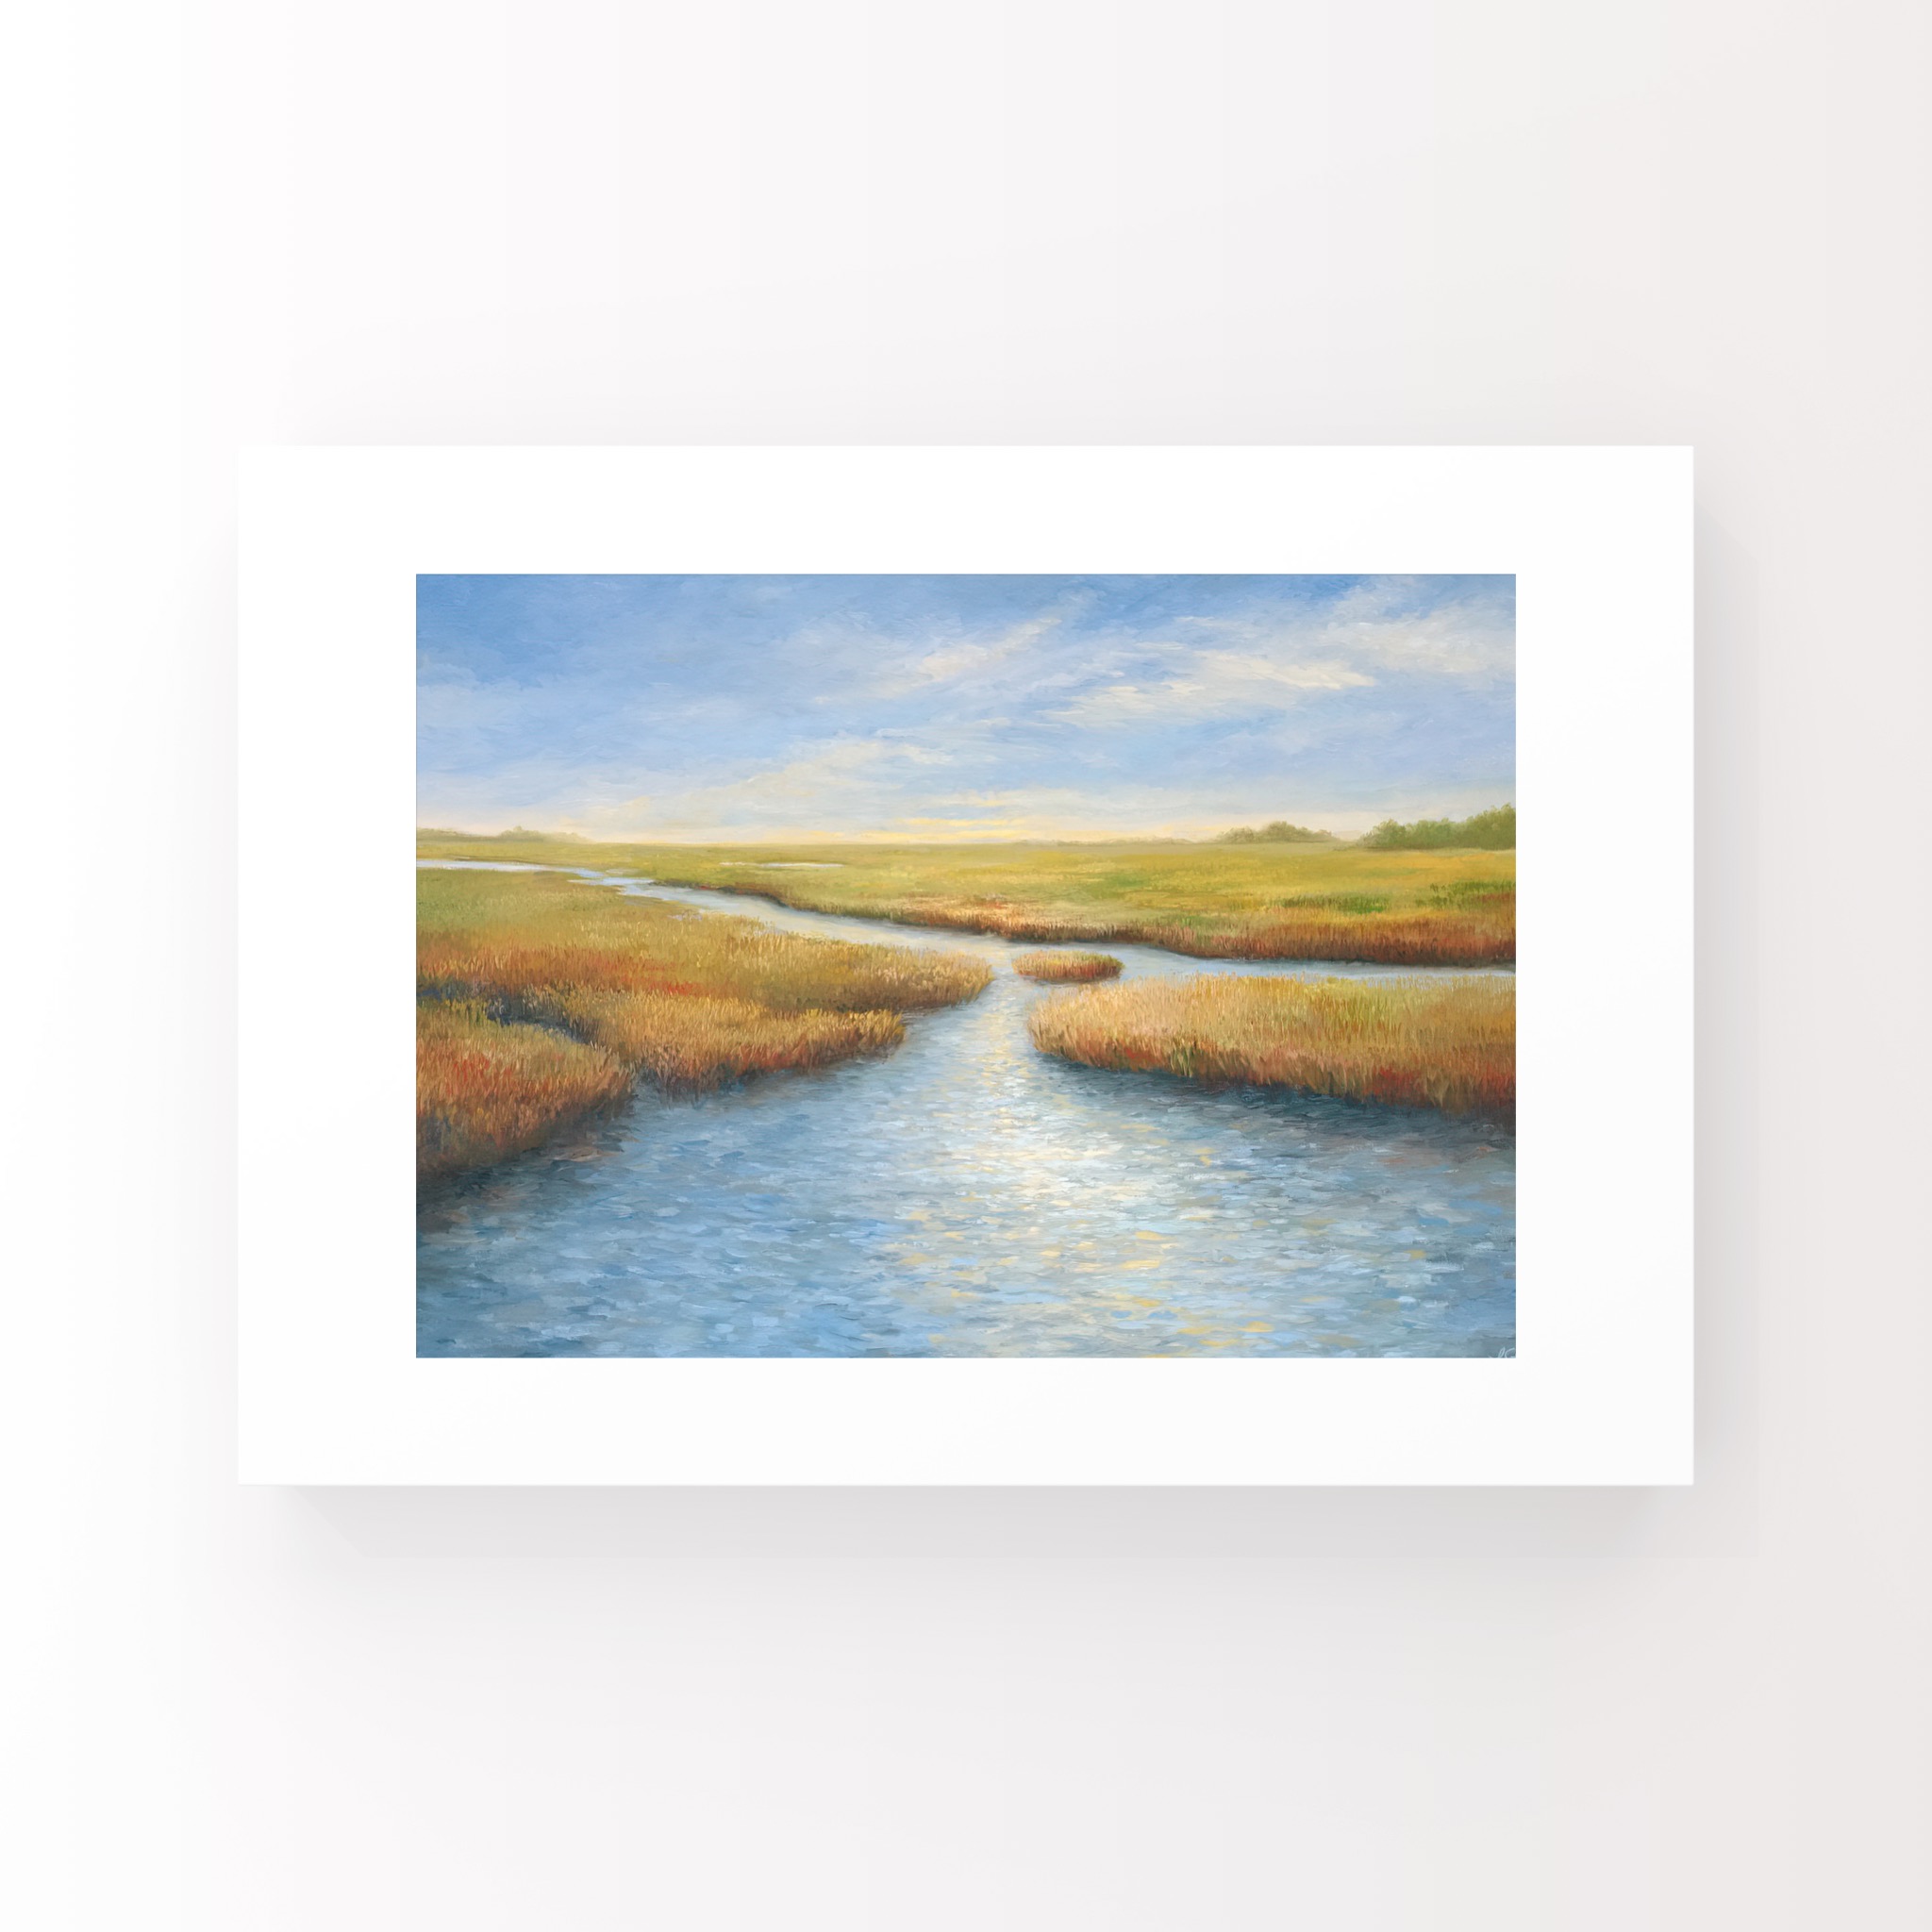 A New Day - Marsh painting by Lisa Strazza